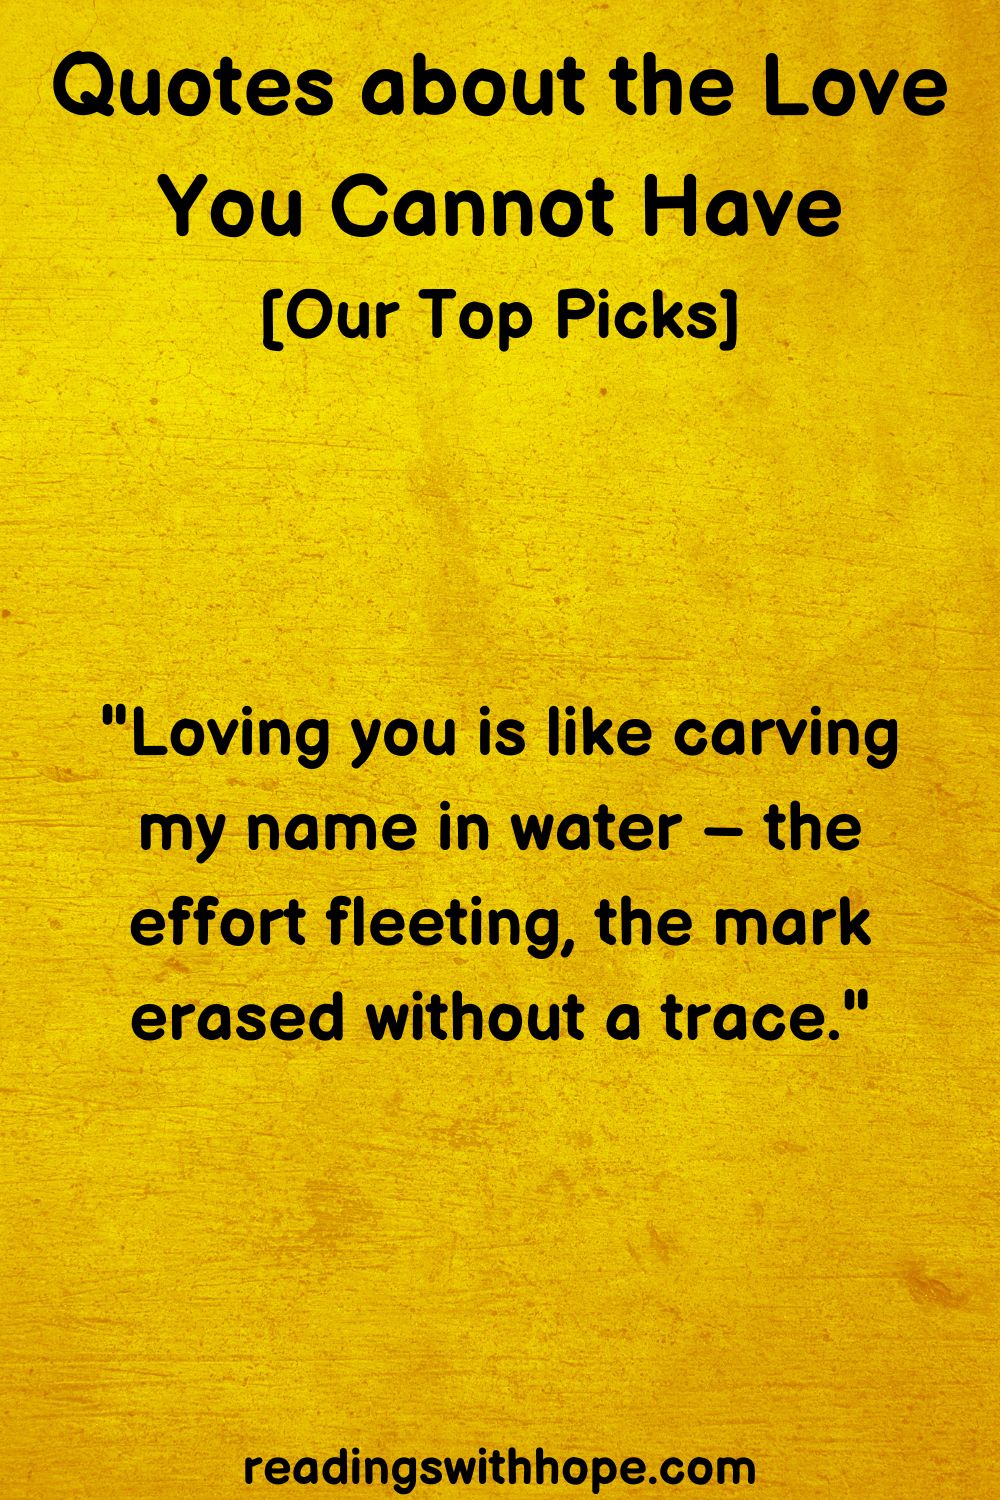 10 Quotes about the Love You Cannot Have